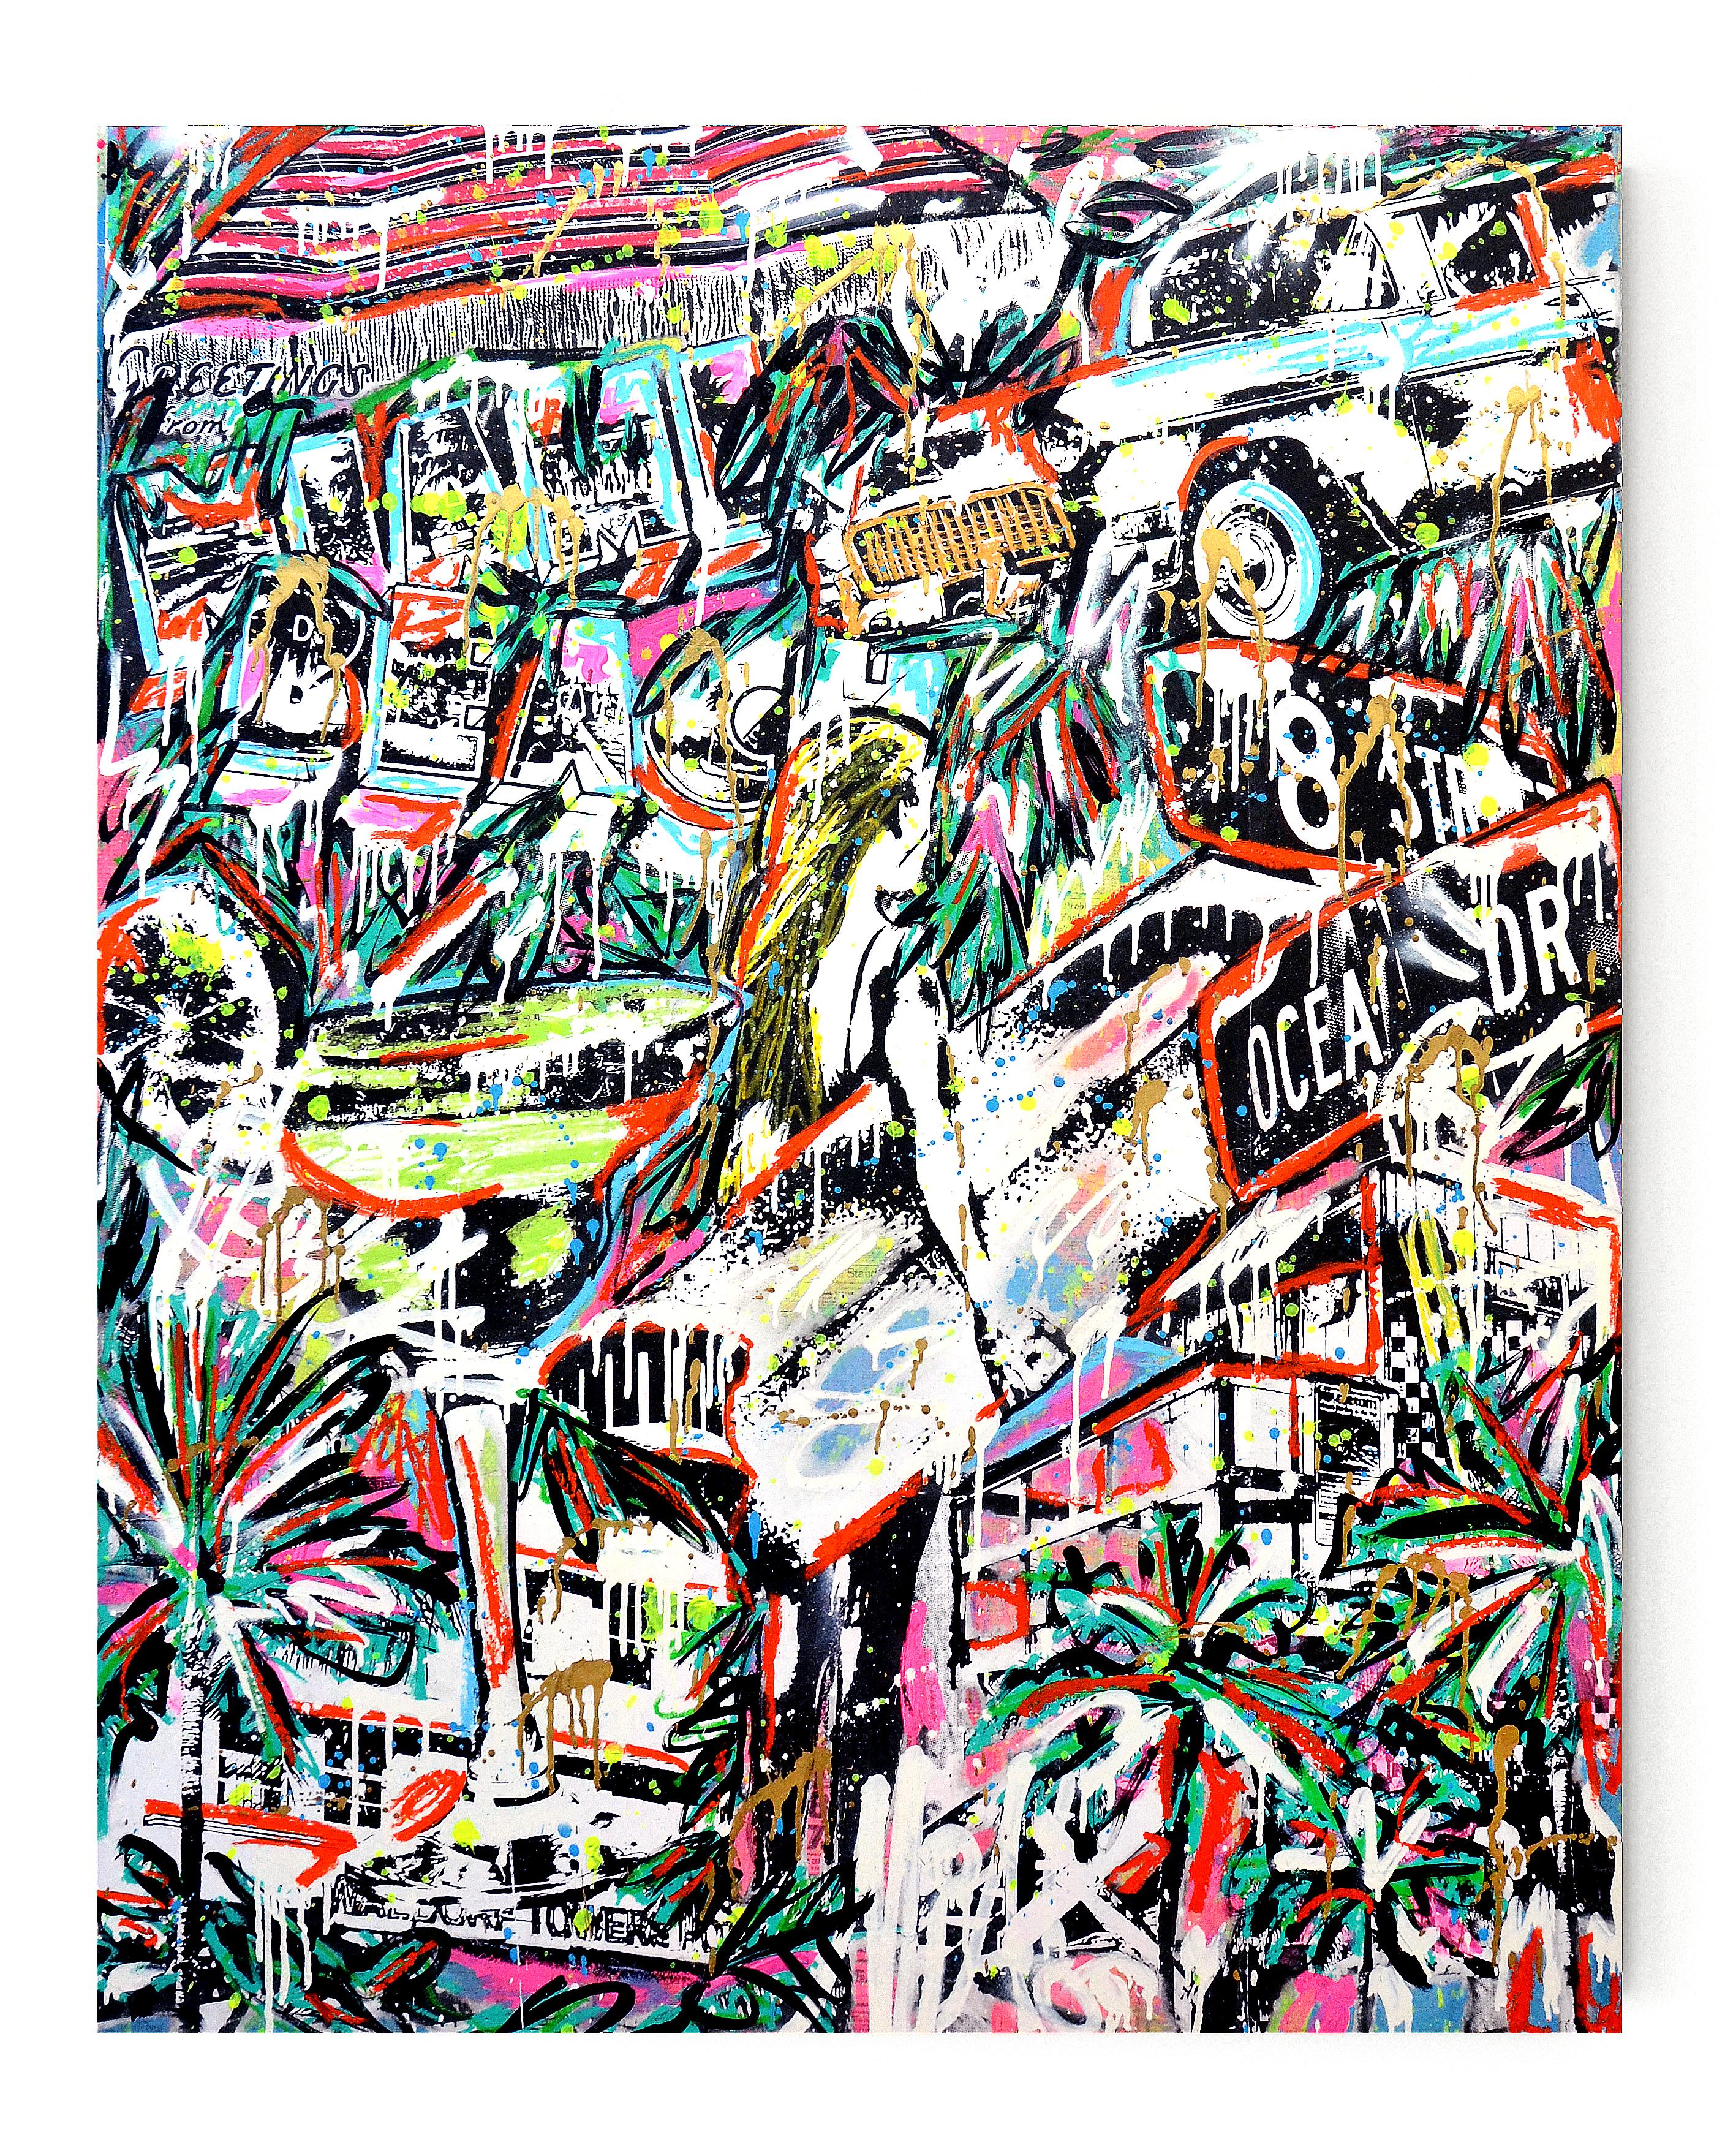 Miami - collage on wood - Mixed Media Art by Seek One